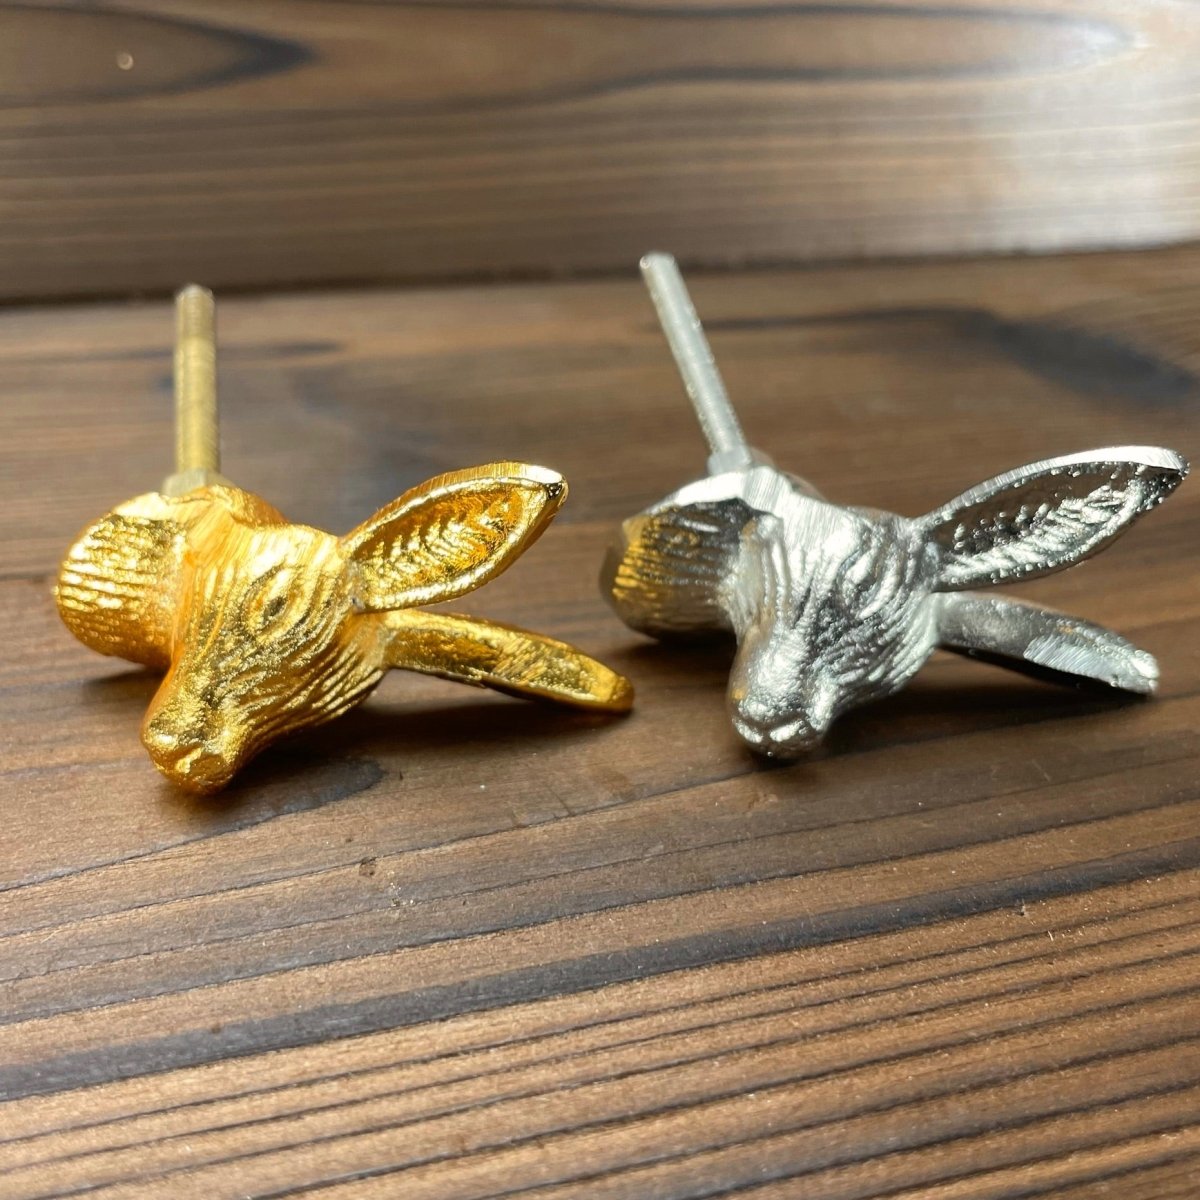 Hare Drawer Knobs in Gold, Silver or Antique Brass - DaRosa Creations